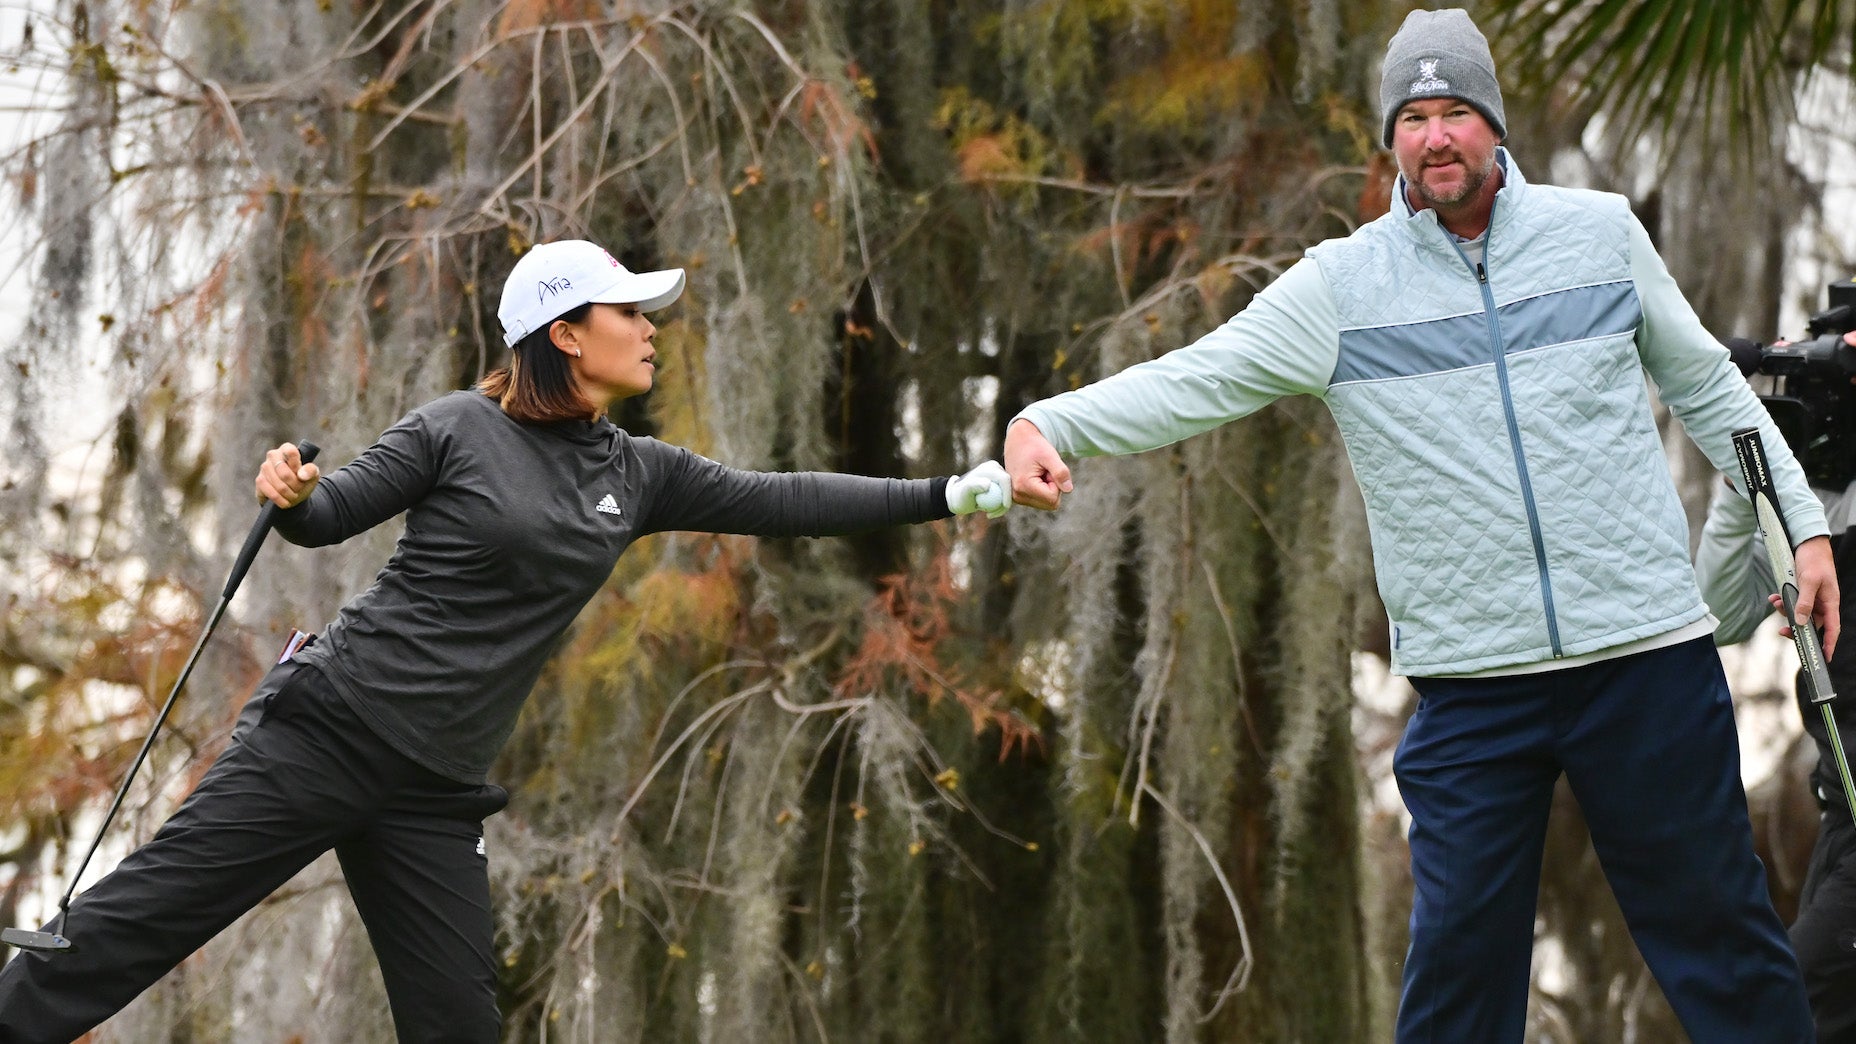 Danielle Kang and Derek Lowe won their respective divisions at the Hilton Vacations Tournament of Champions.